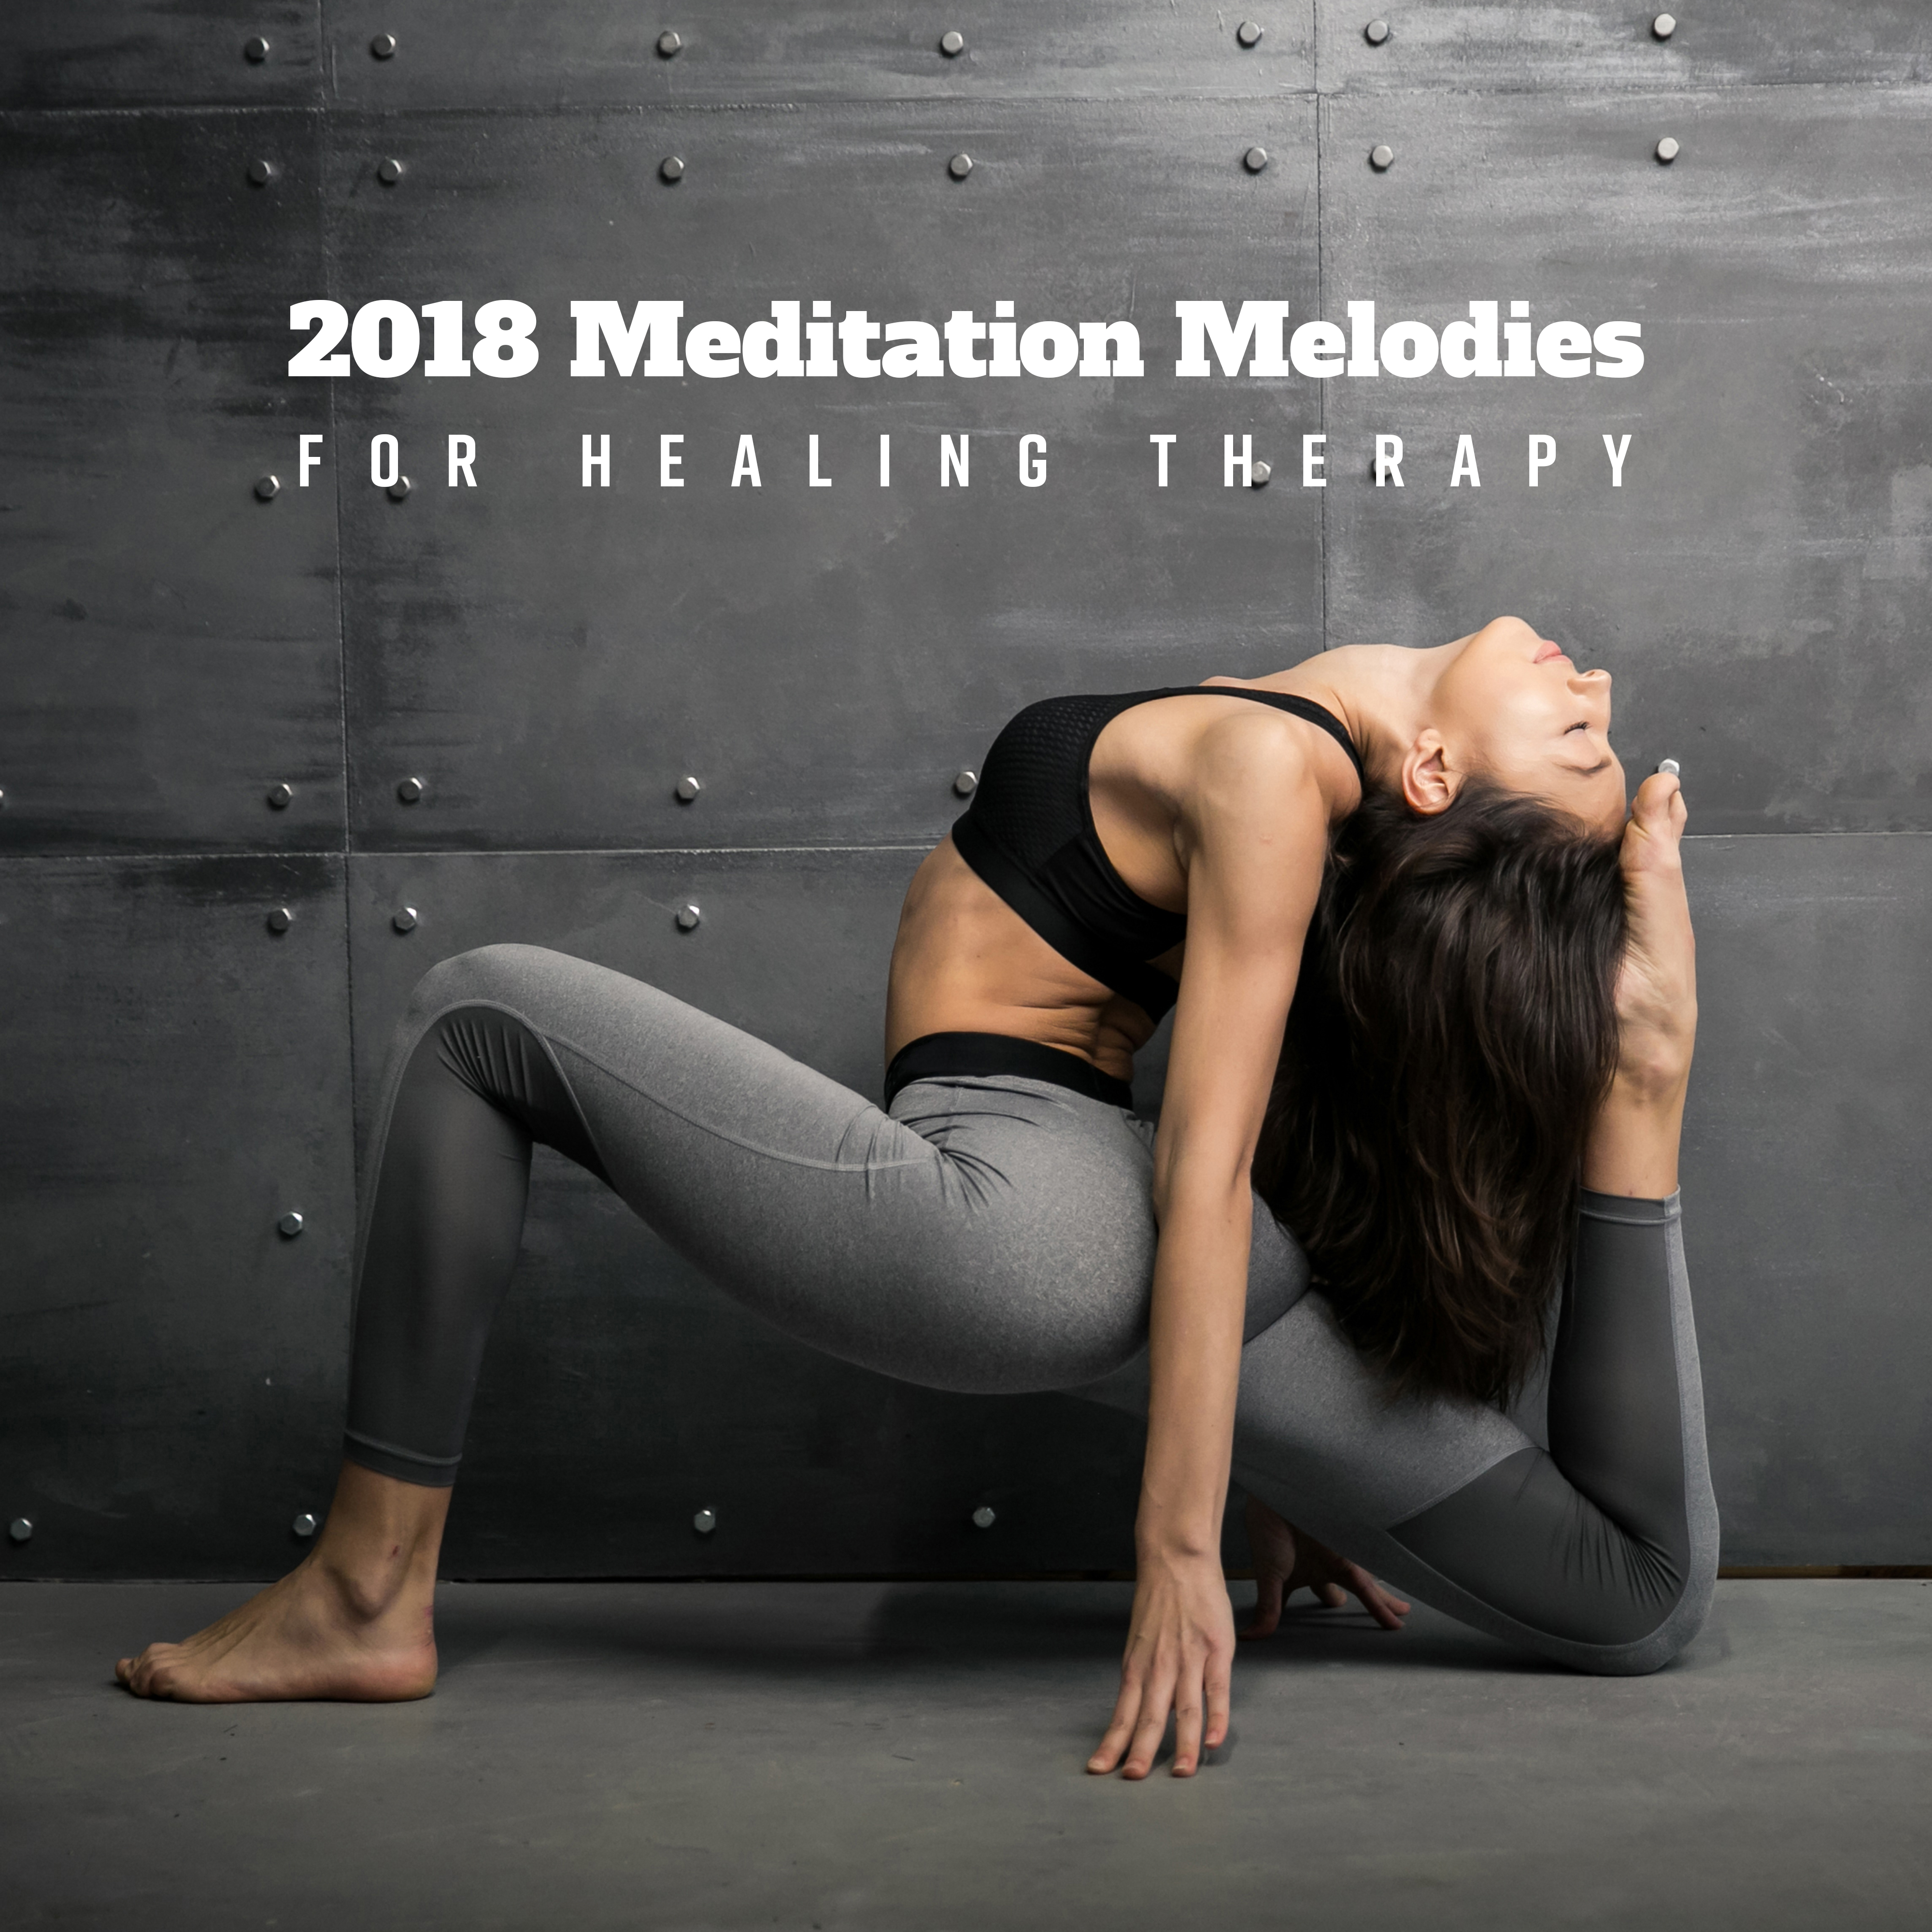 2018 Meditation Melodies for Healing Therapy